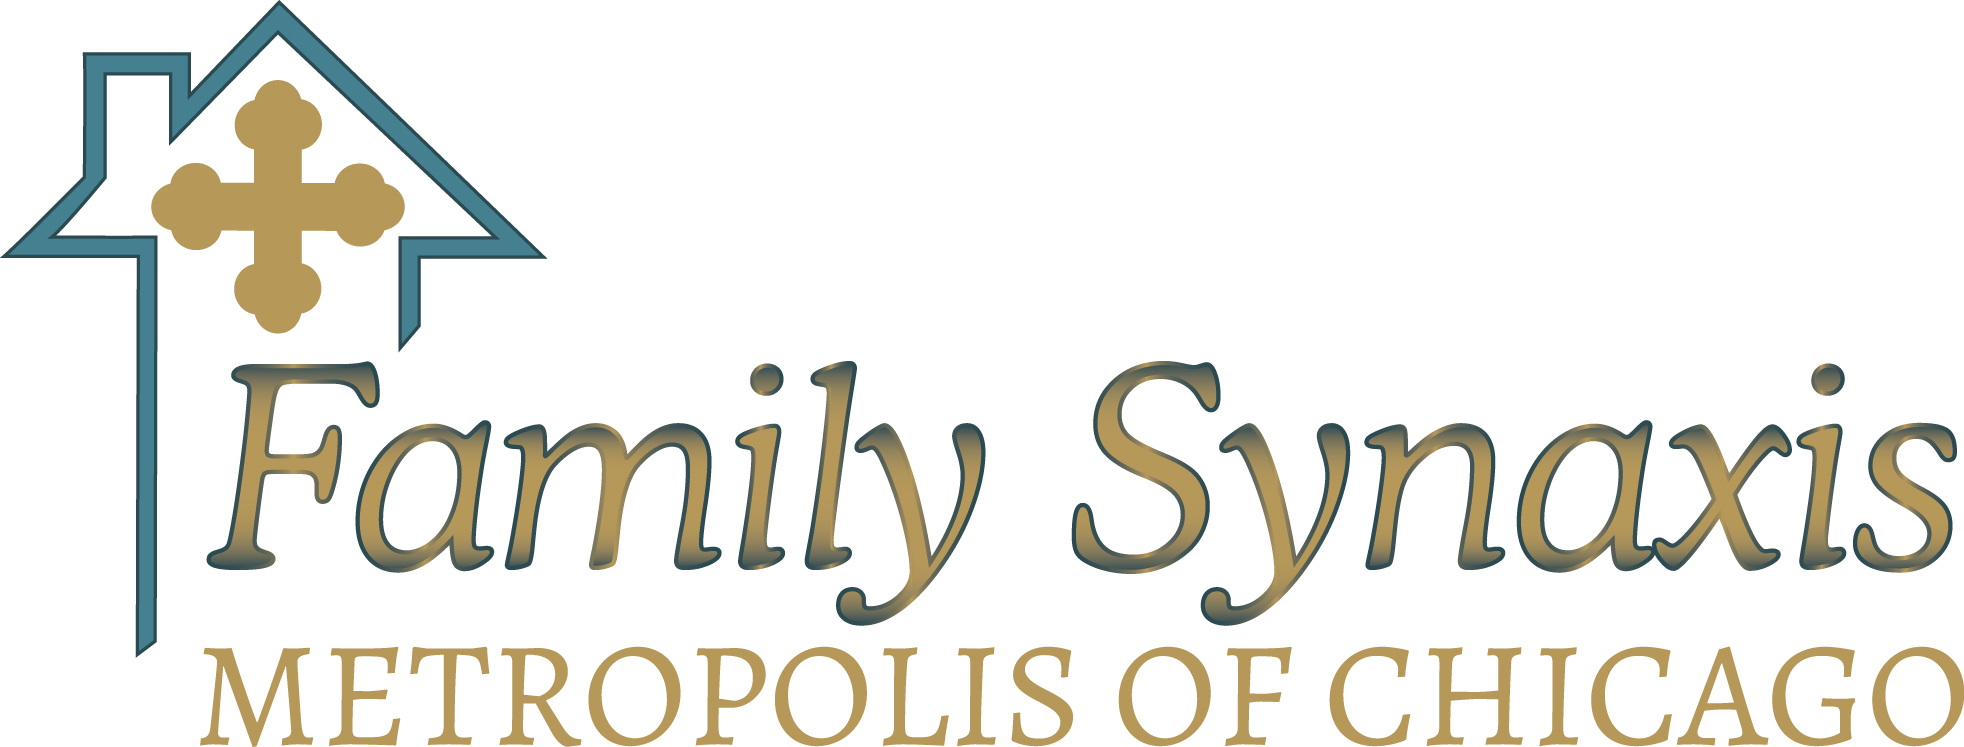 Family Synaxis